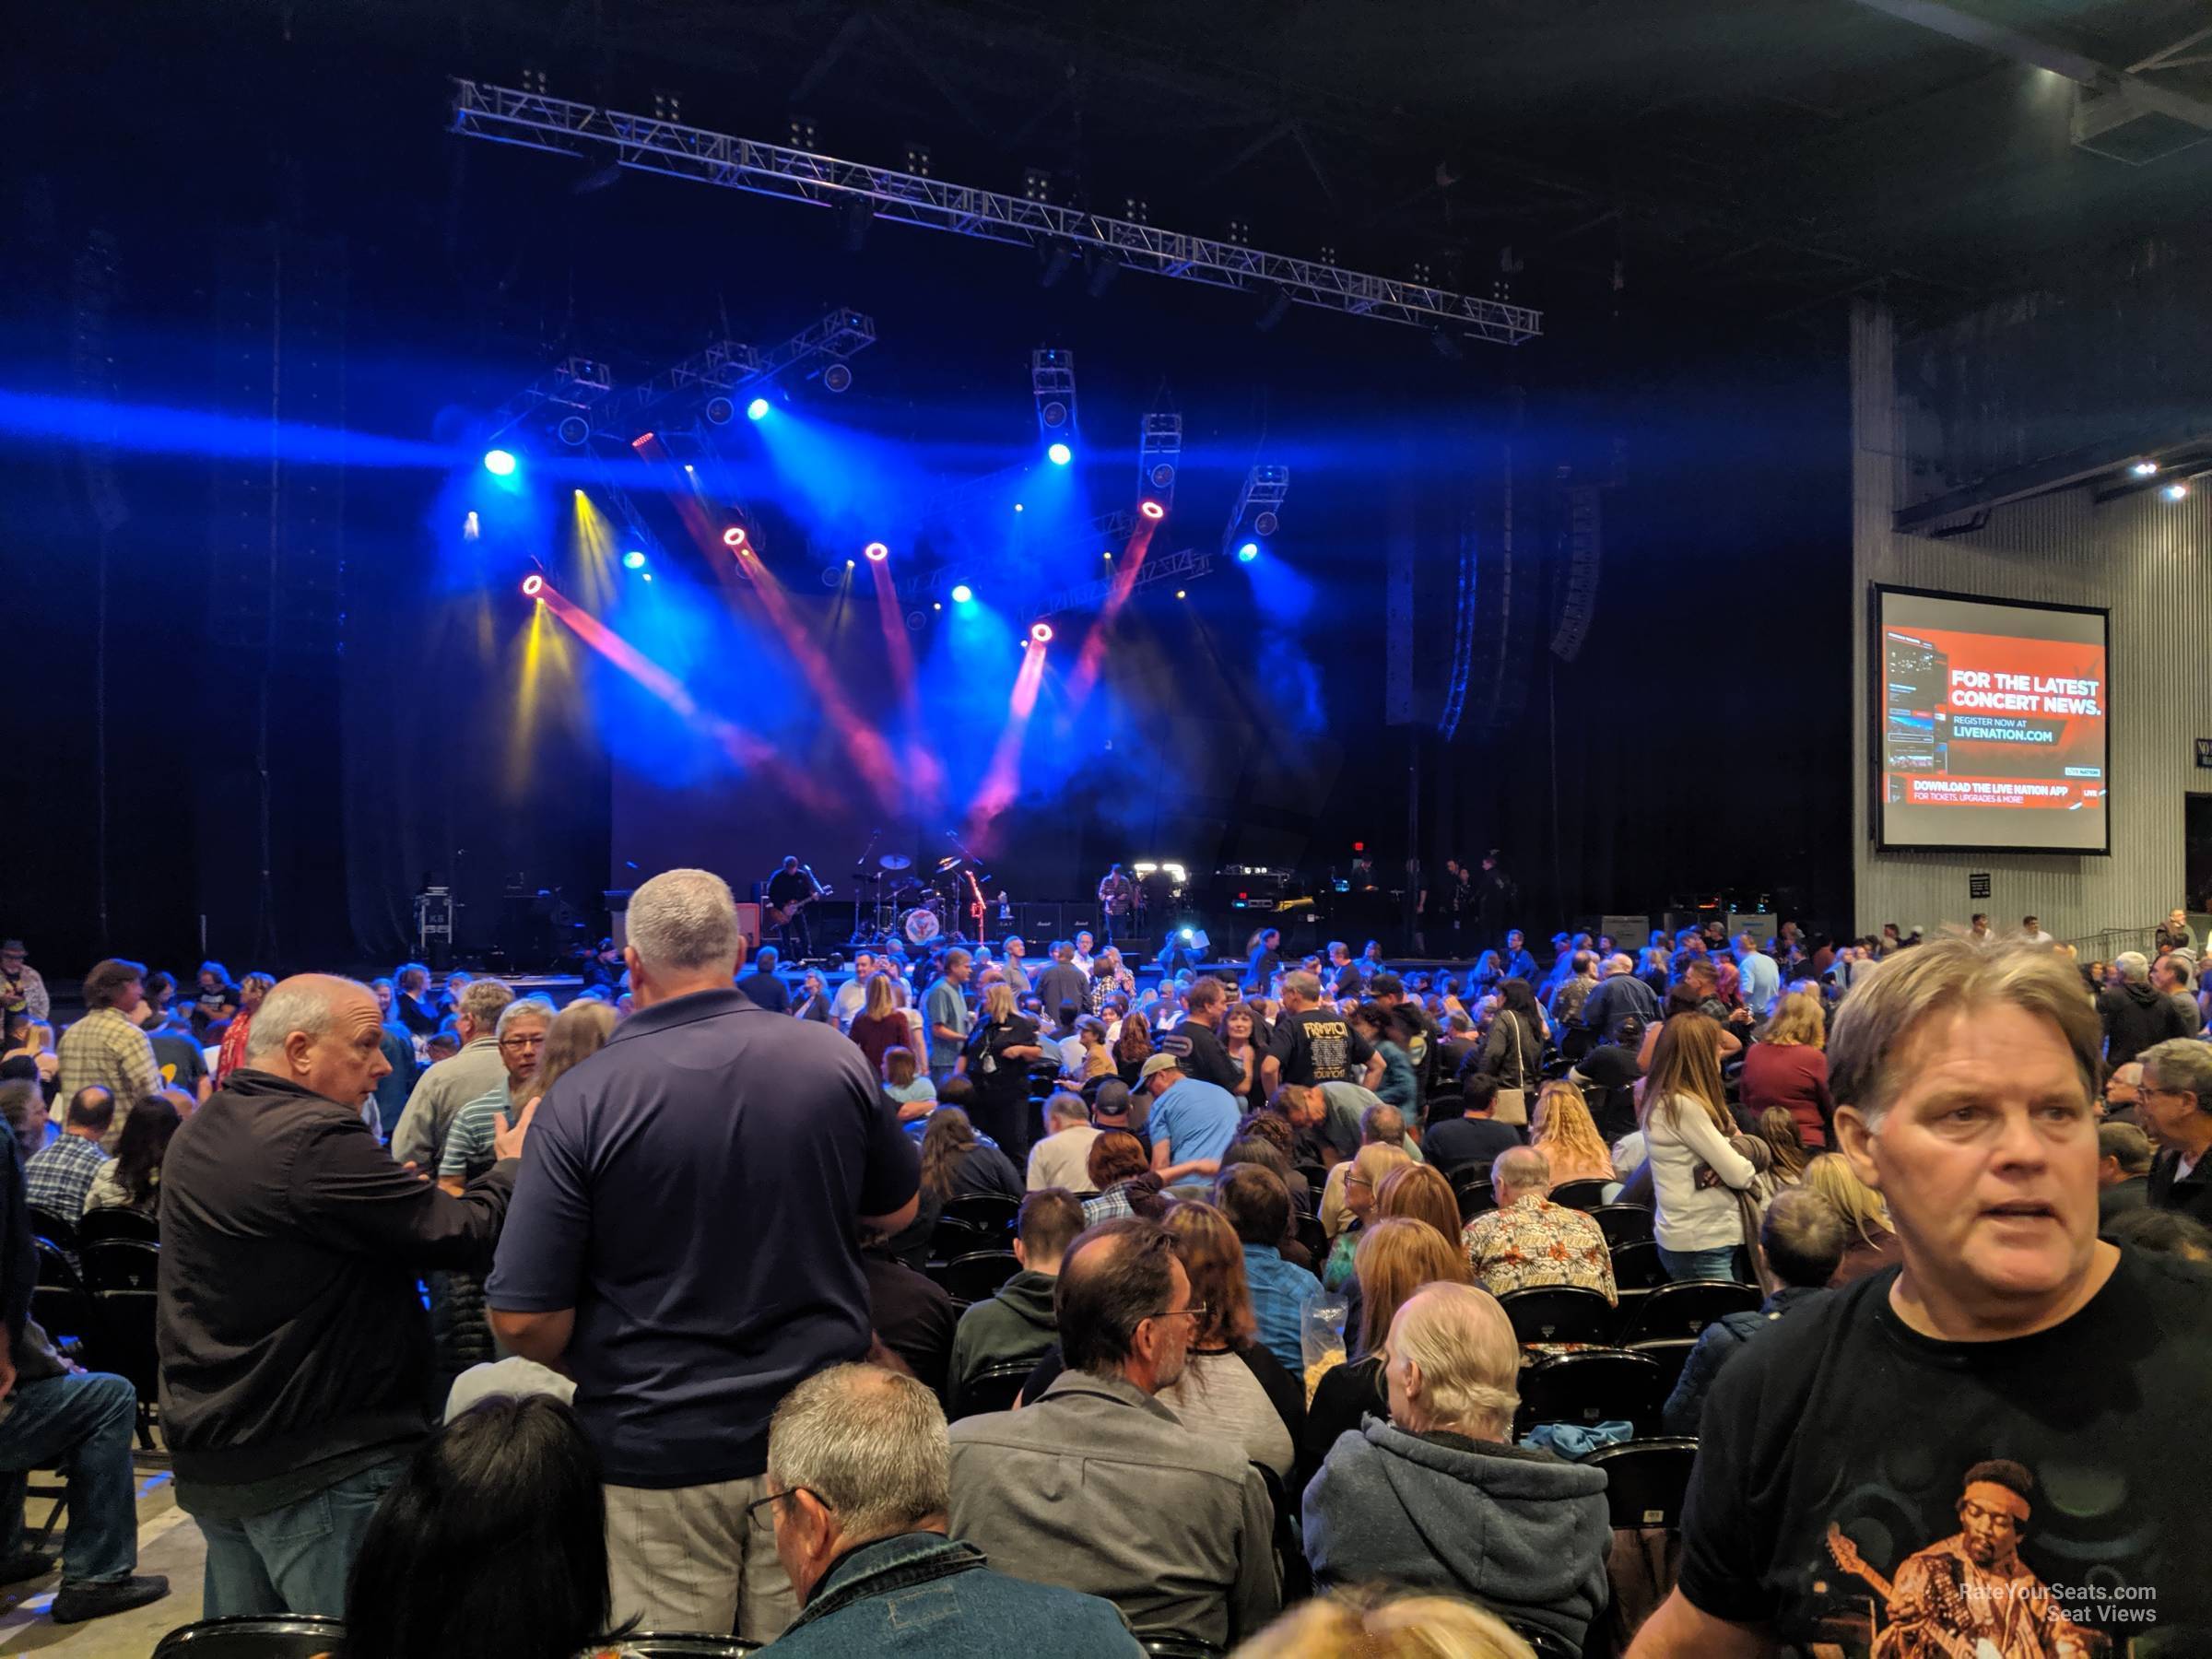 section 105, row k seat view  - concord pavilion